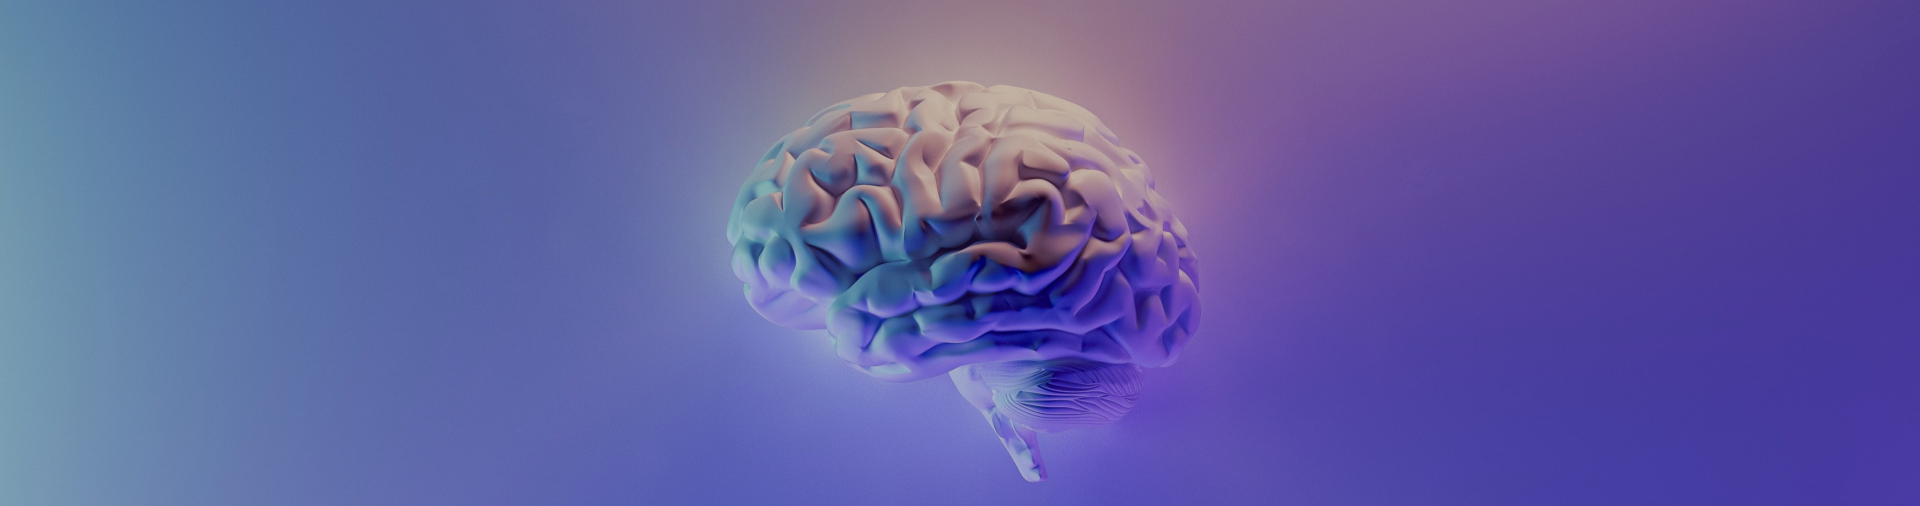 Photo of a brain in blue, purple, and white light color